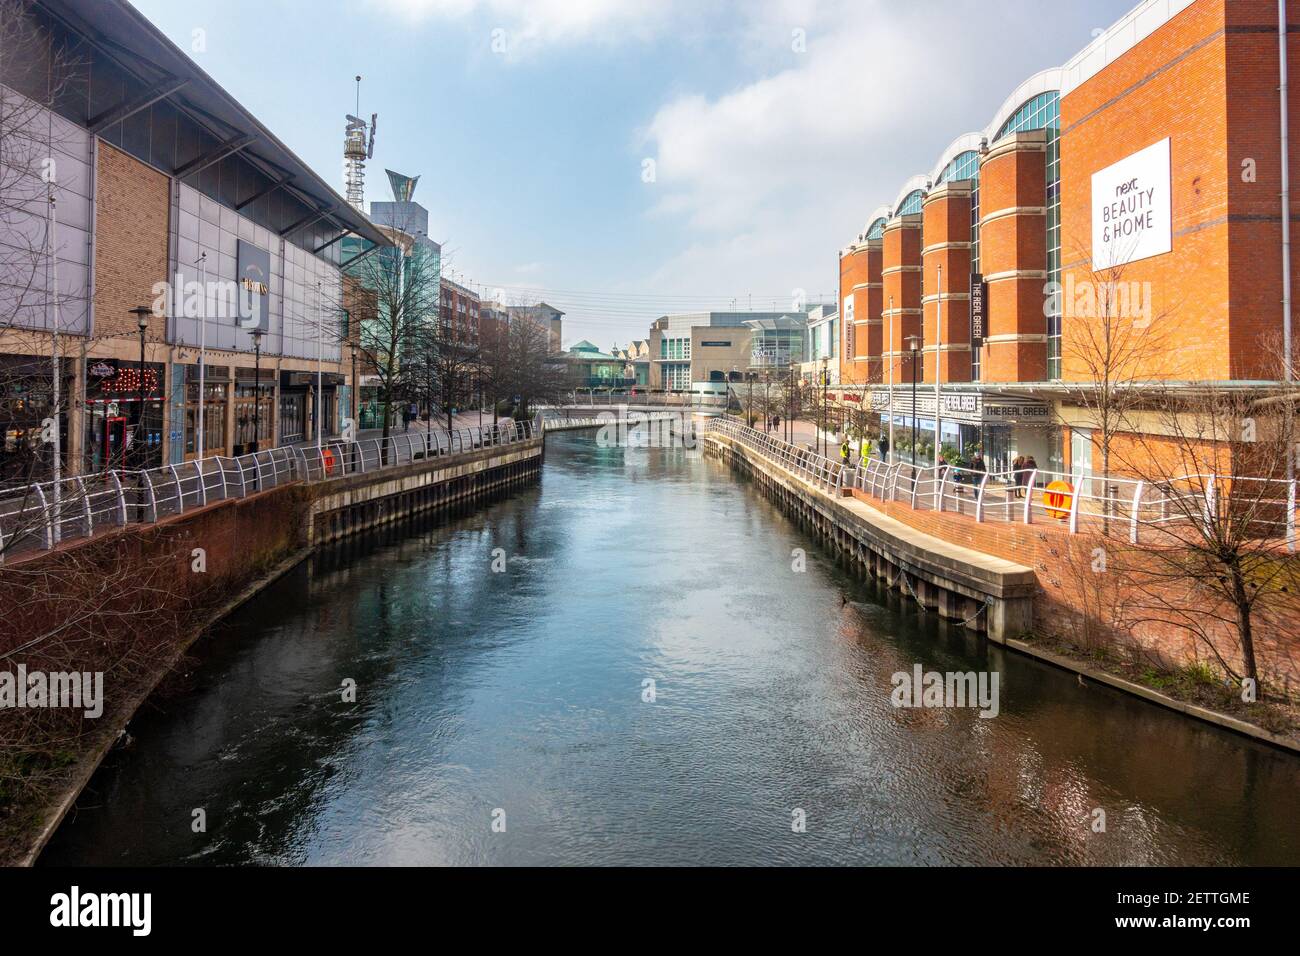 The River Kennet flows through the middle of The Oracle Shopping Centre in Reading, UK. The Riverside area is home to restaurants, cafes and a cinema. Stock Photo